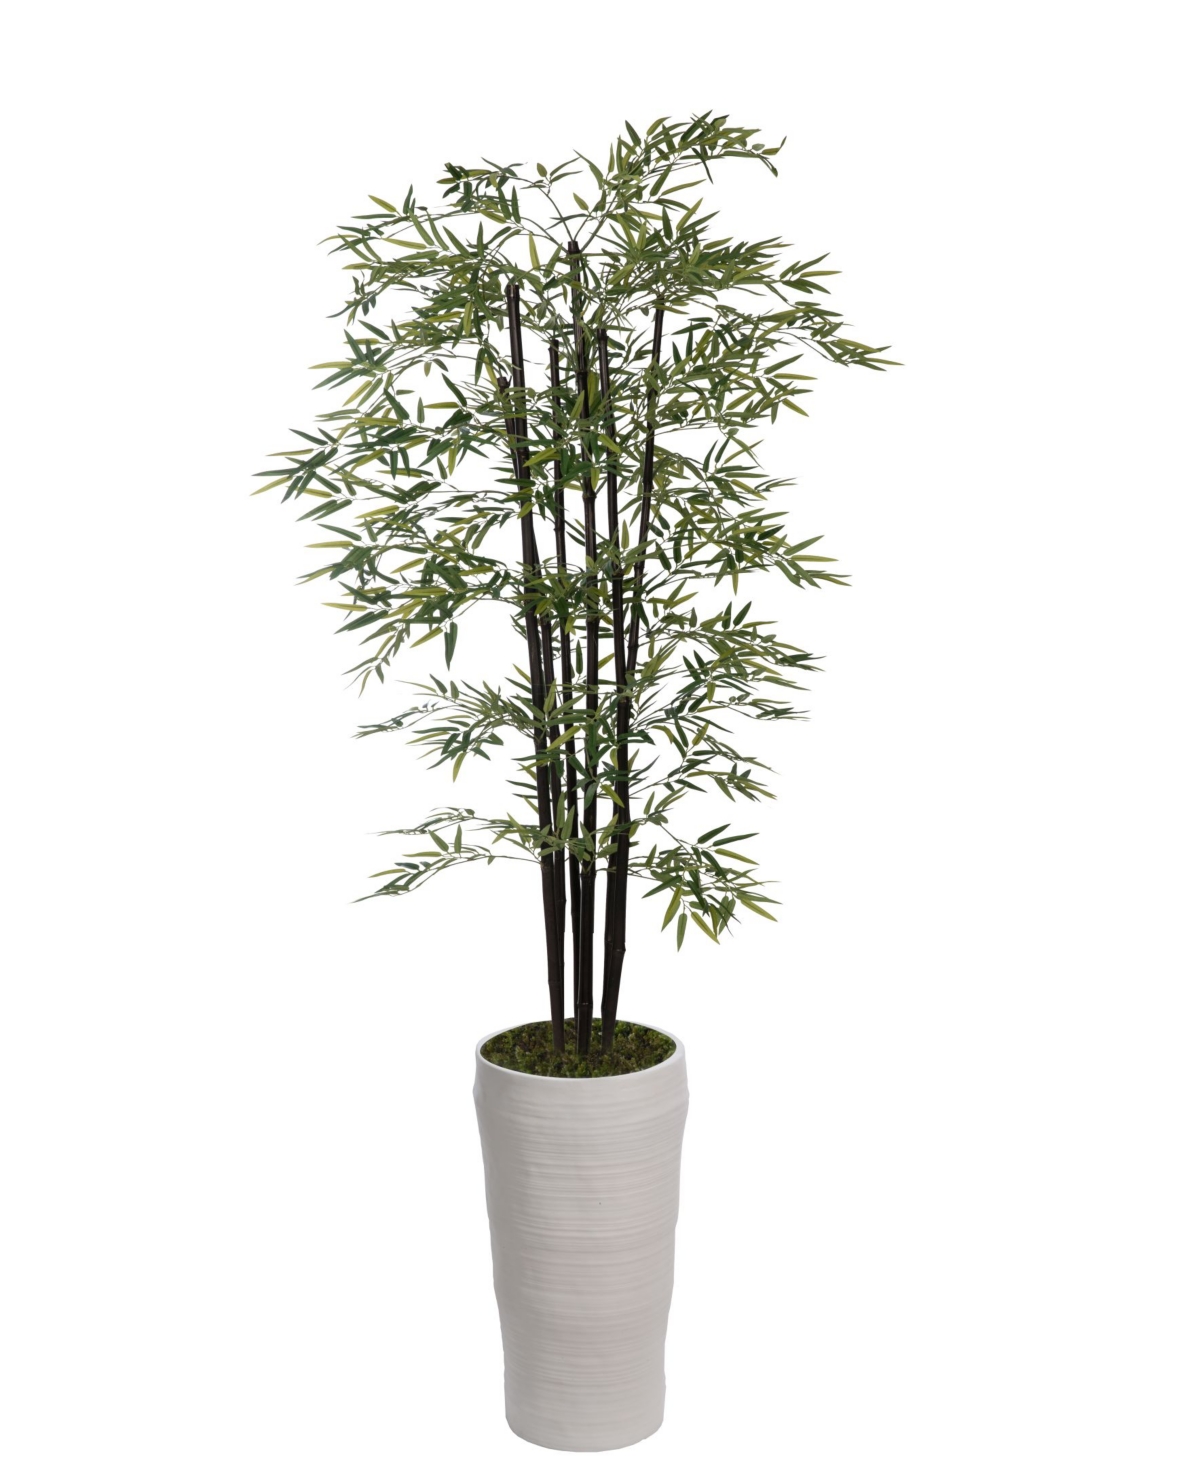 93" Tall Bamboo Tree With Decorative Black Poles and Fiberstone Planter - Green